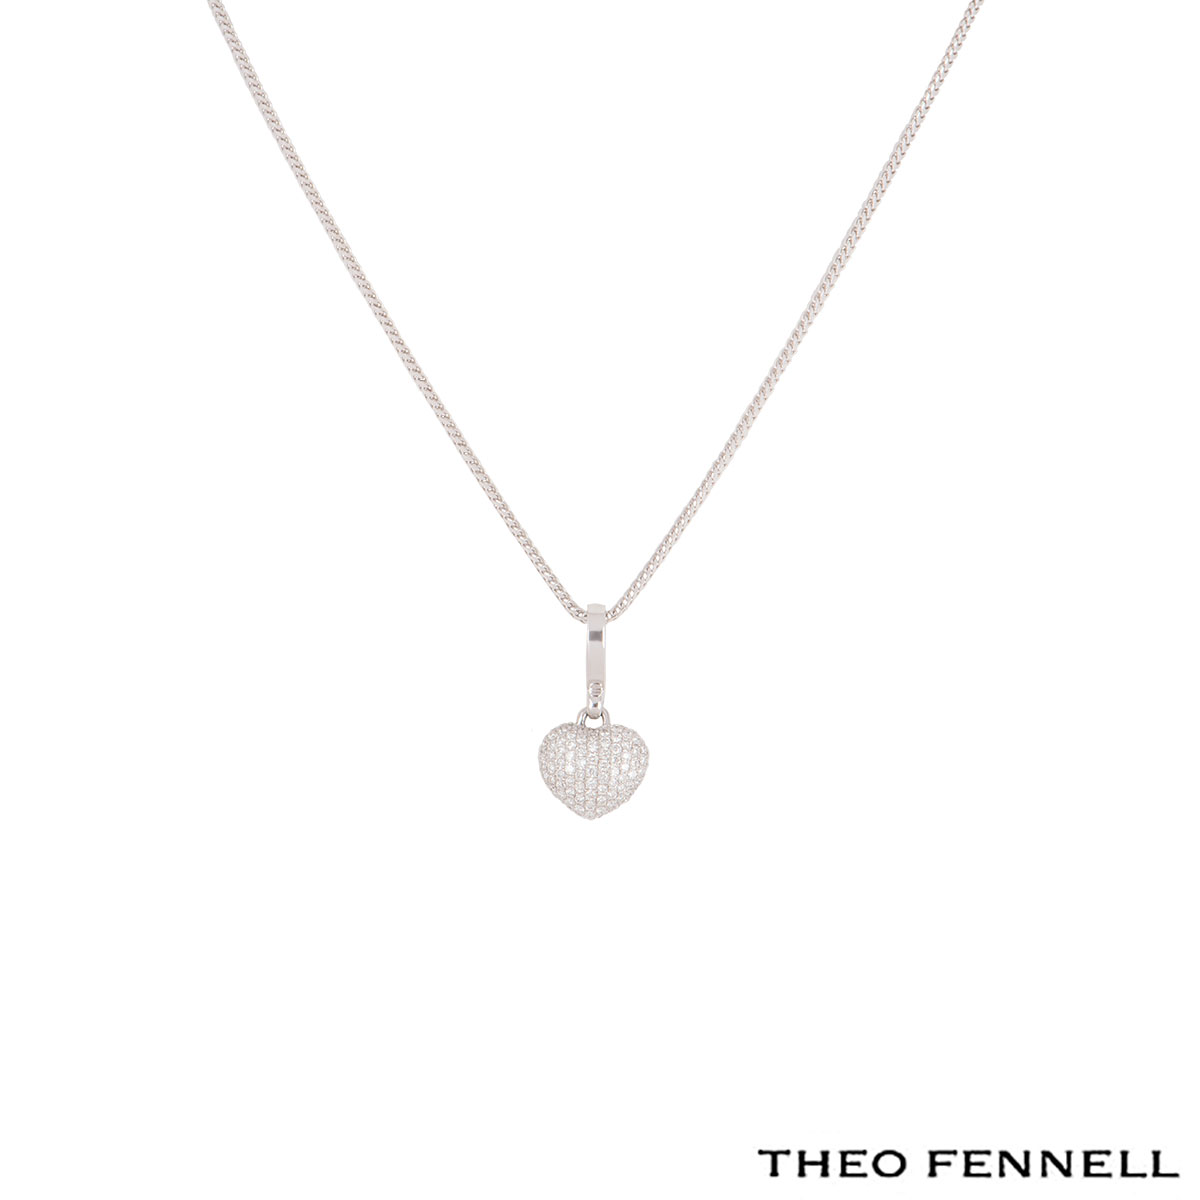 Theo Fennell 18ct White Gold Diamond Heart Charm